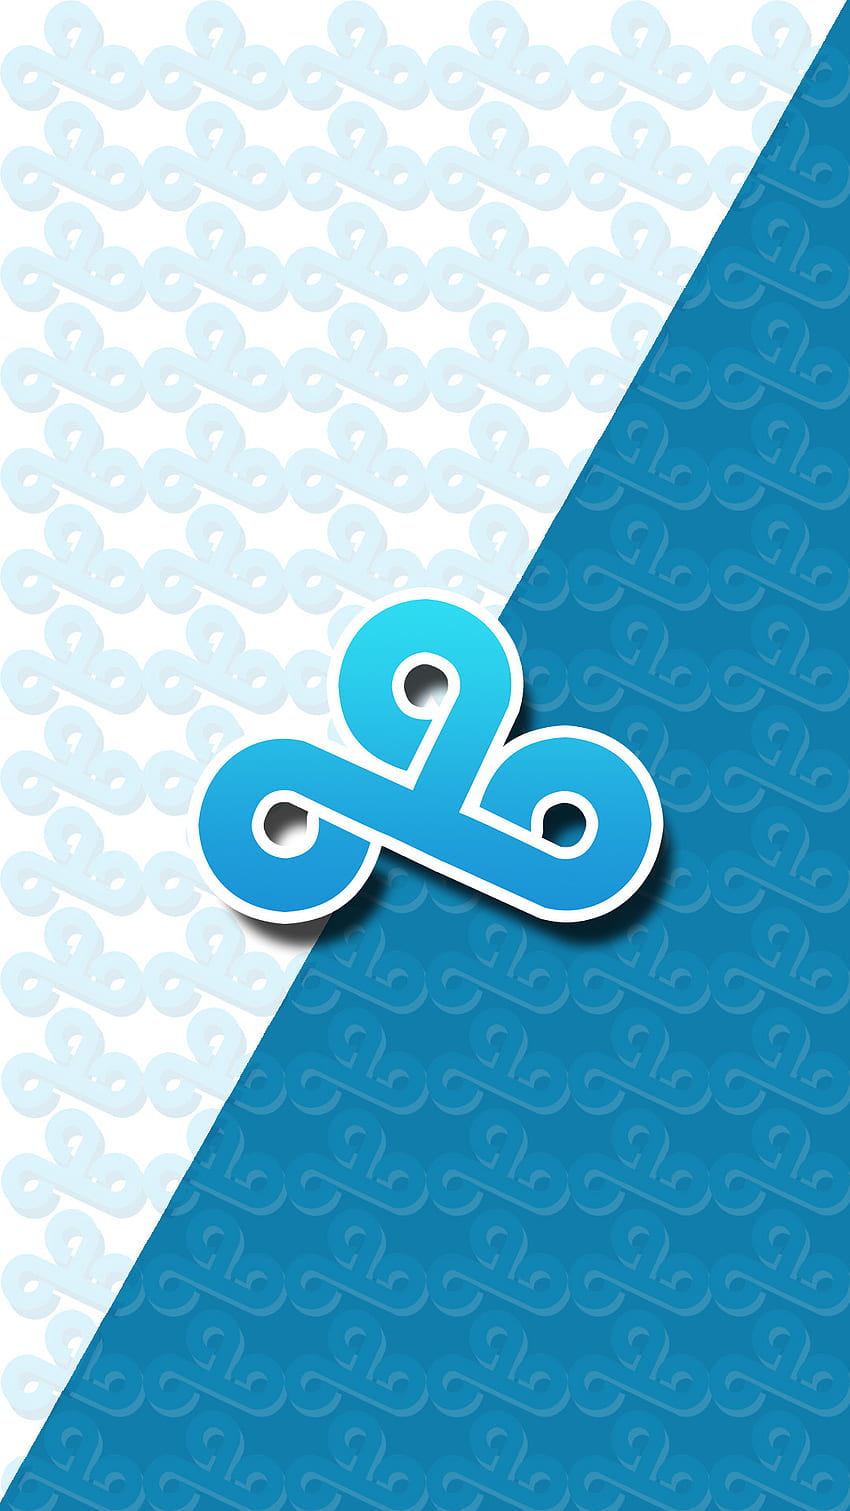 So in celebration of Cloud9 Winning i created a phone :) tell me what HD phone wallpaper